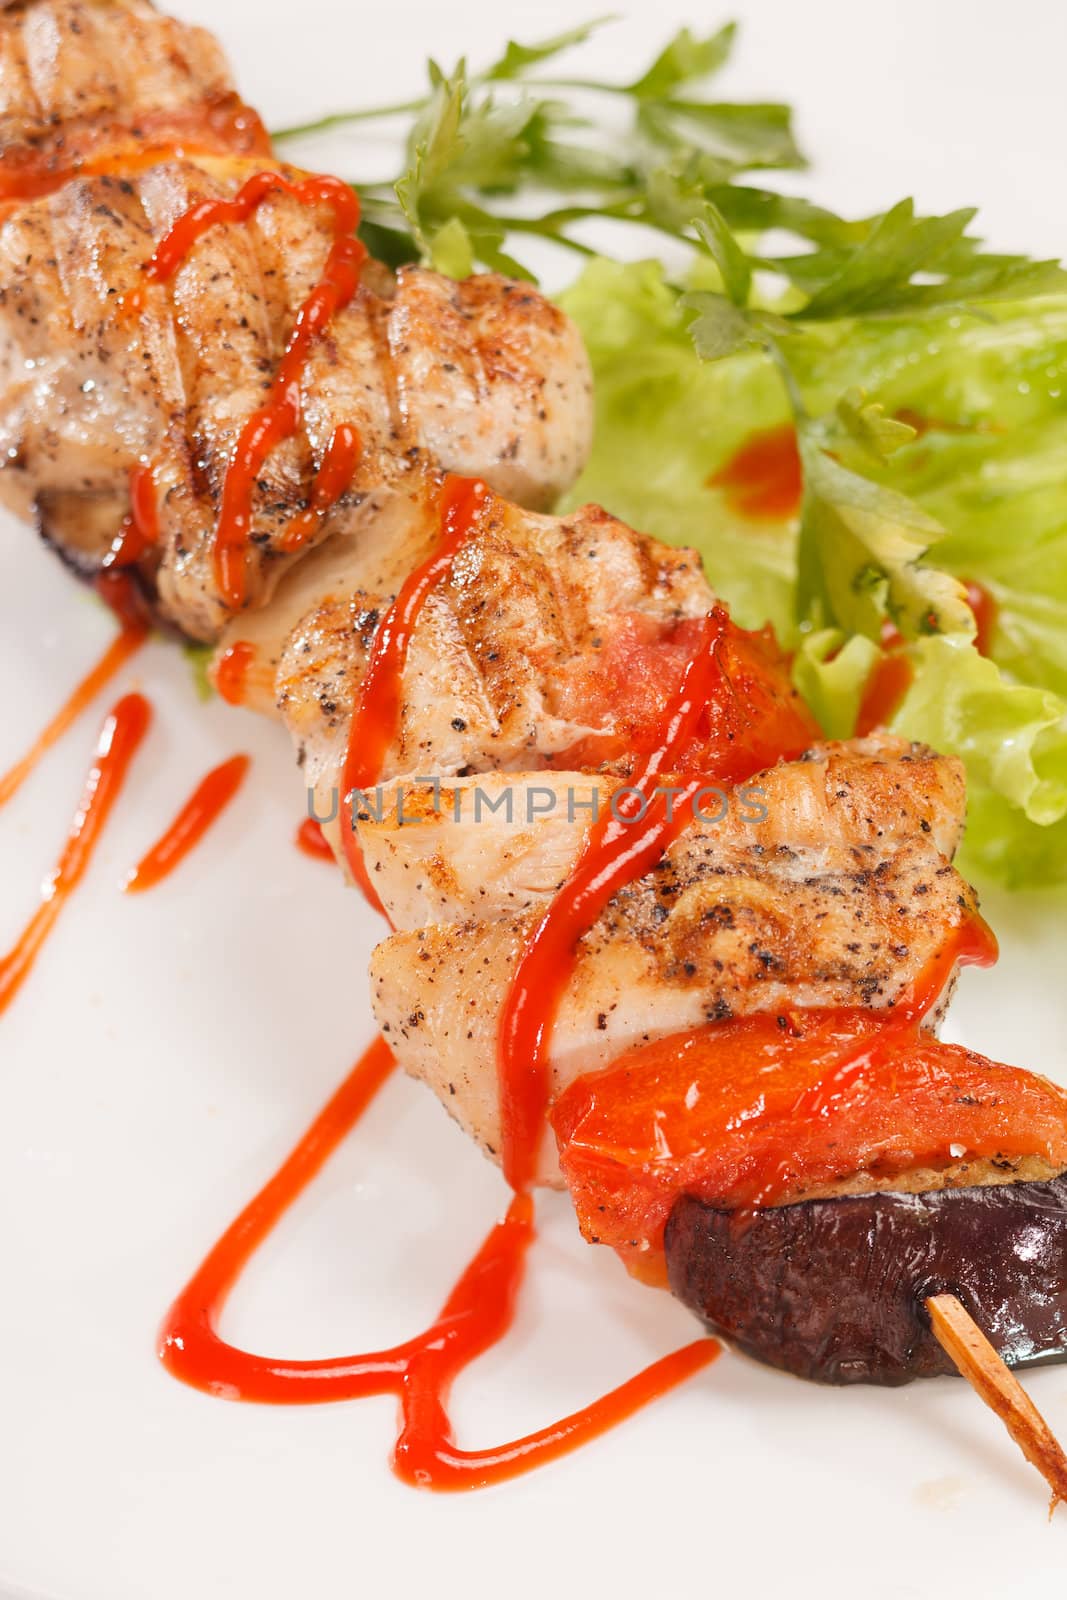 Chicken kebab with tomato sauce